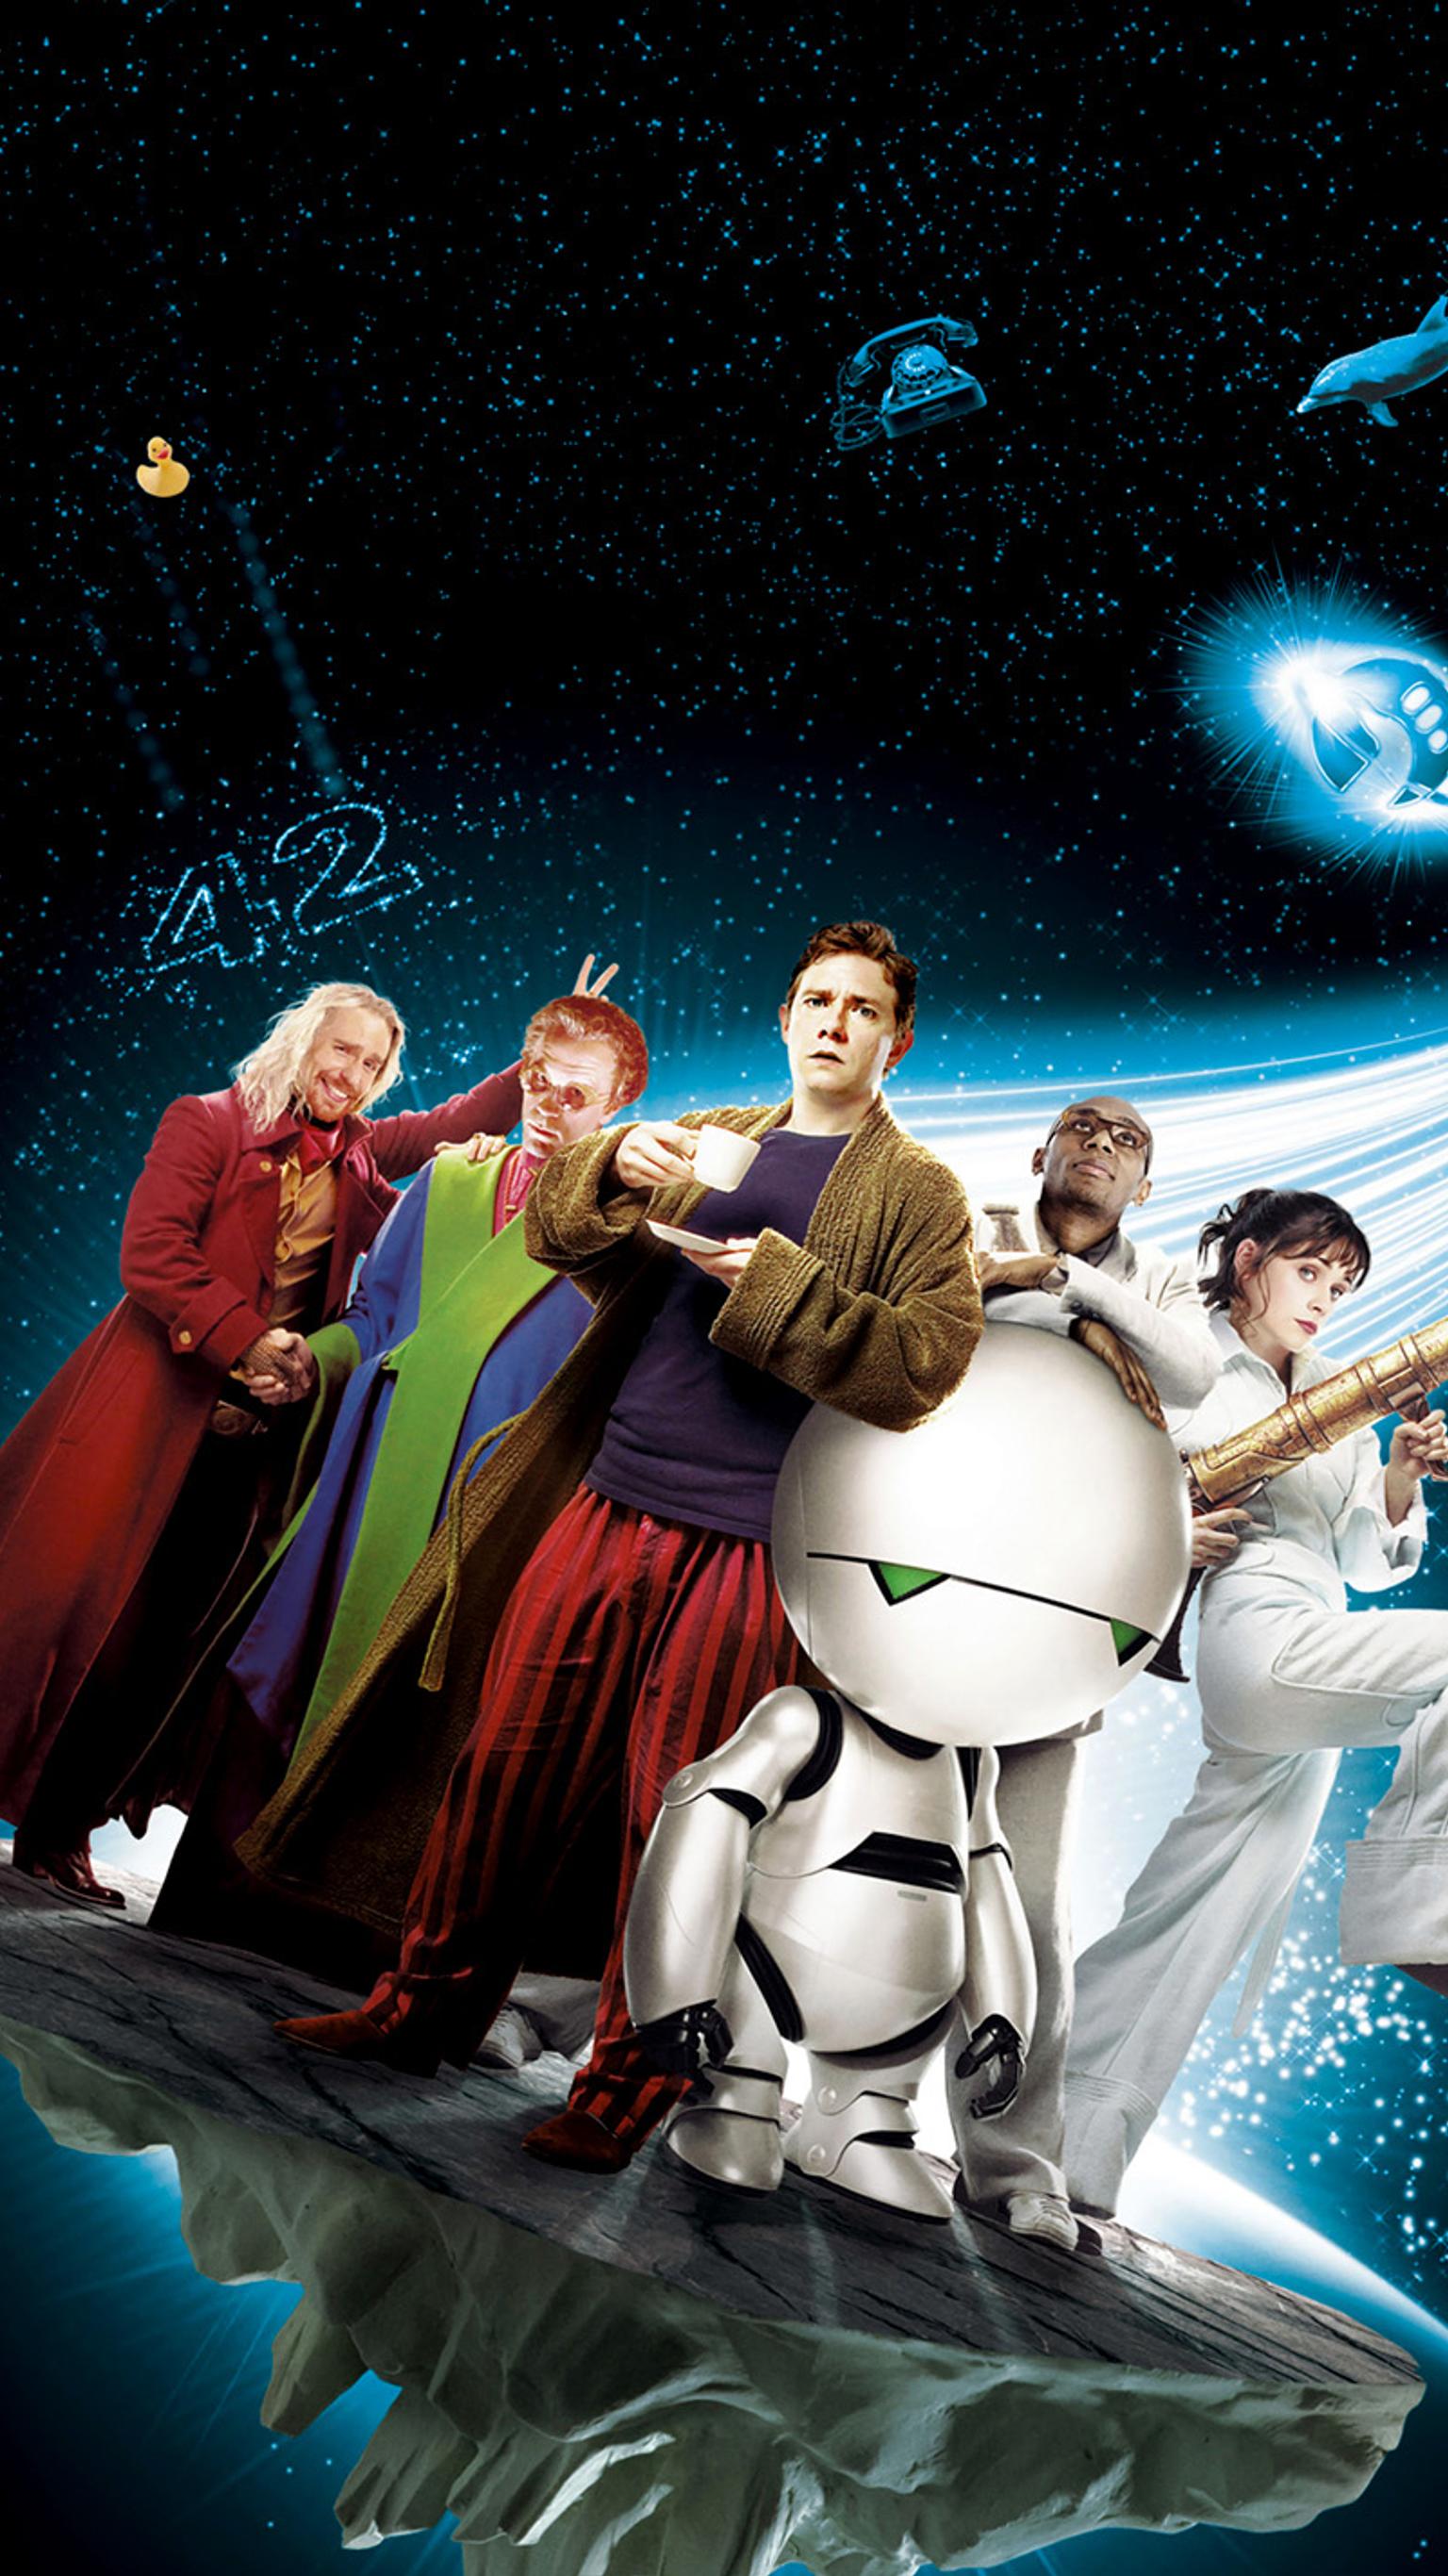 Hitchhikers guide to the galaxy wiki